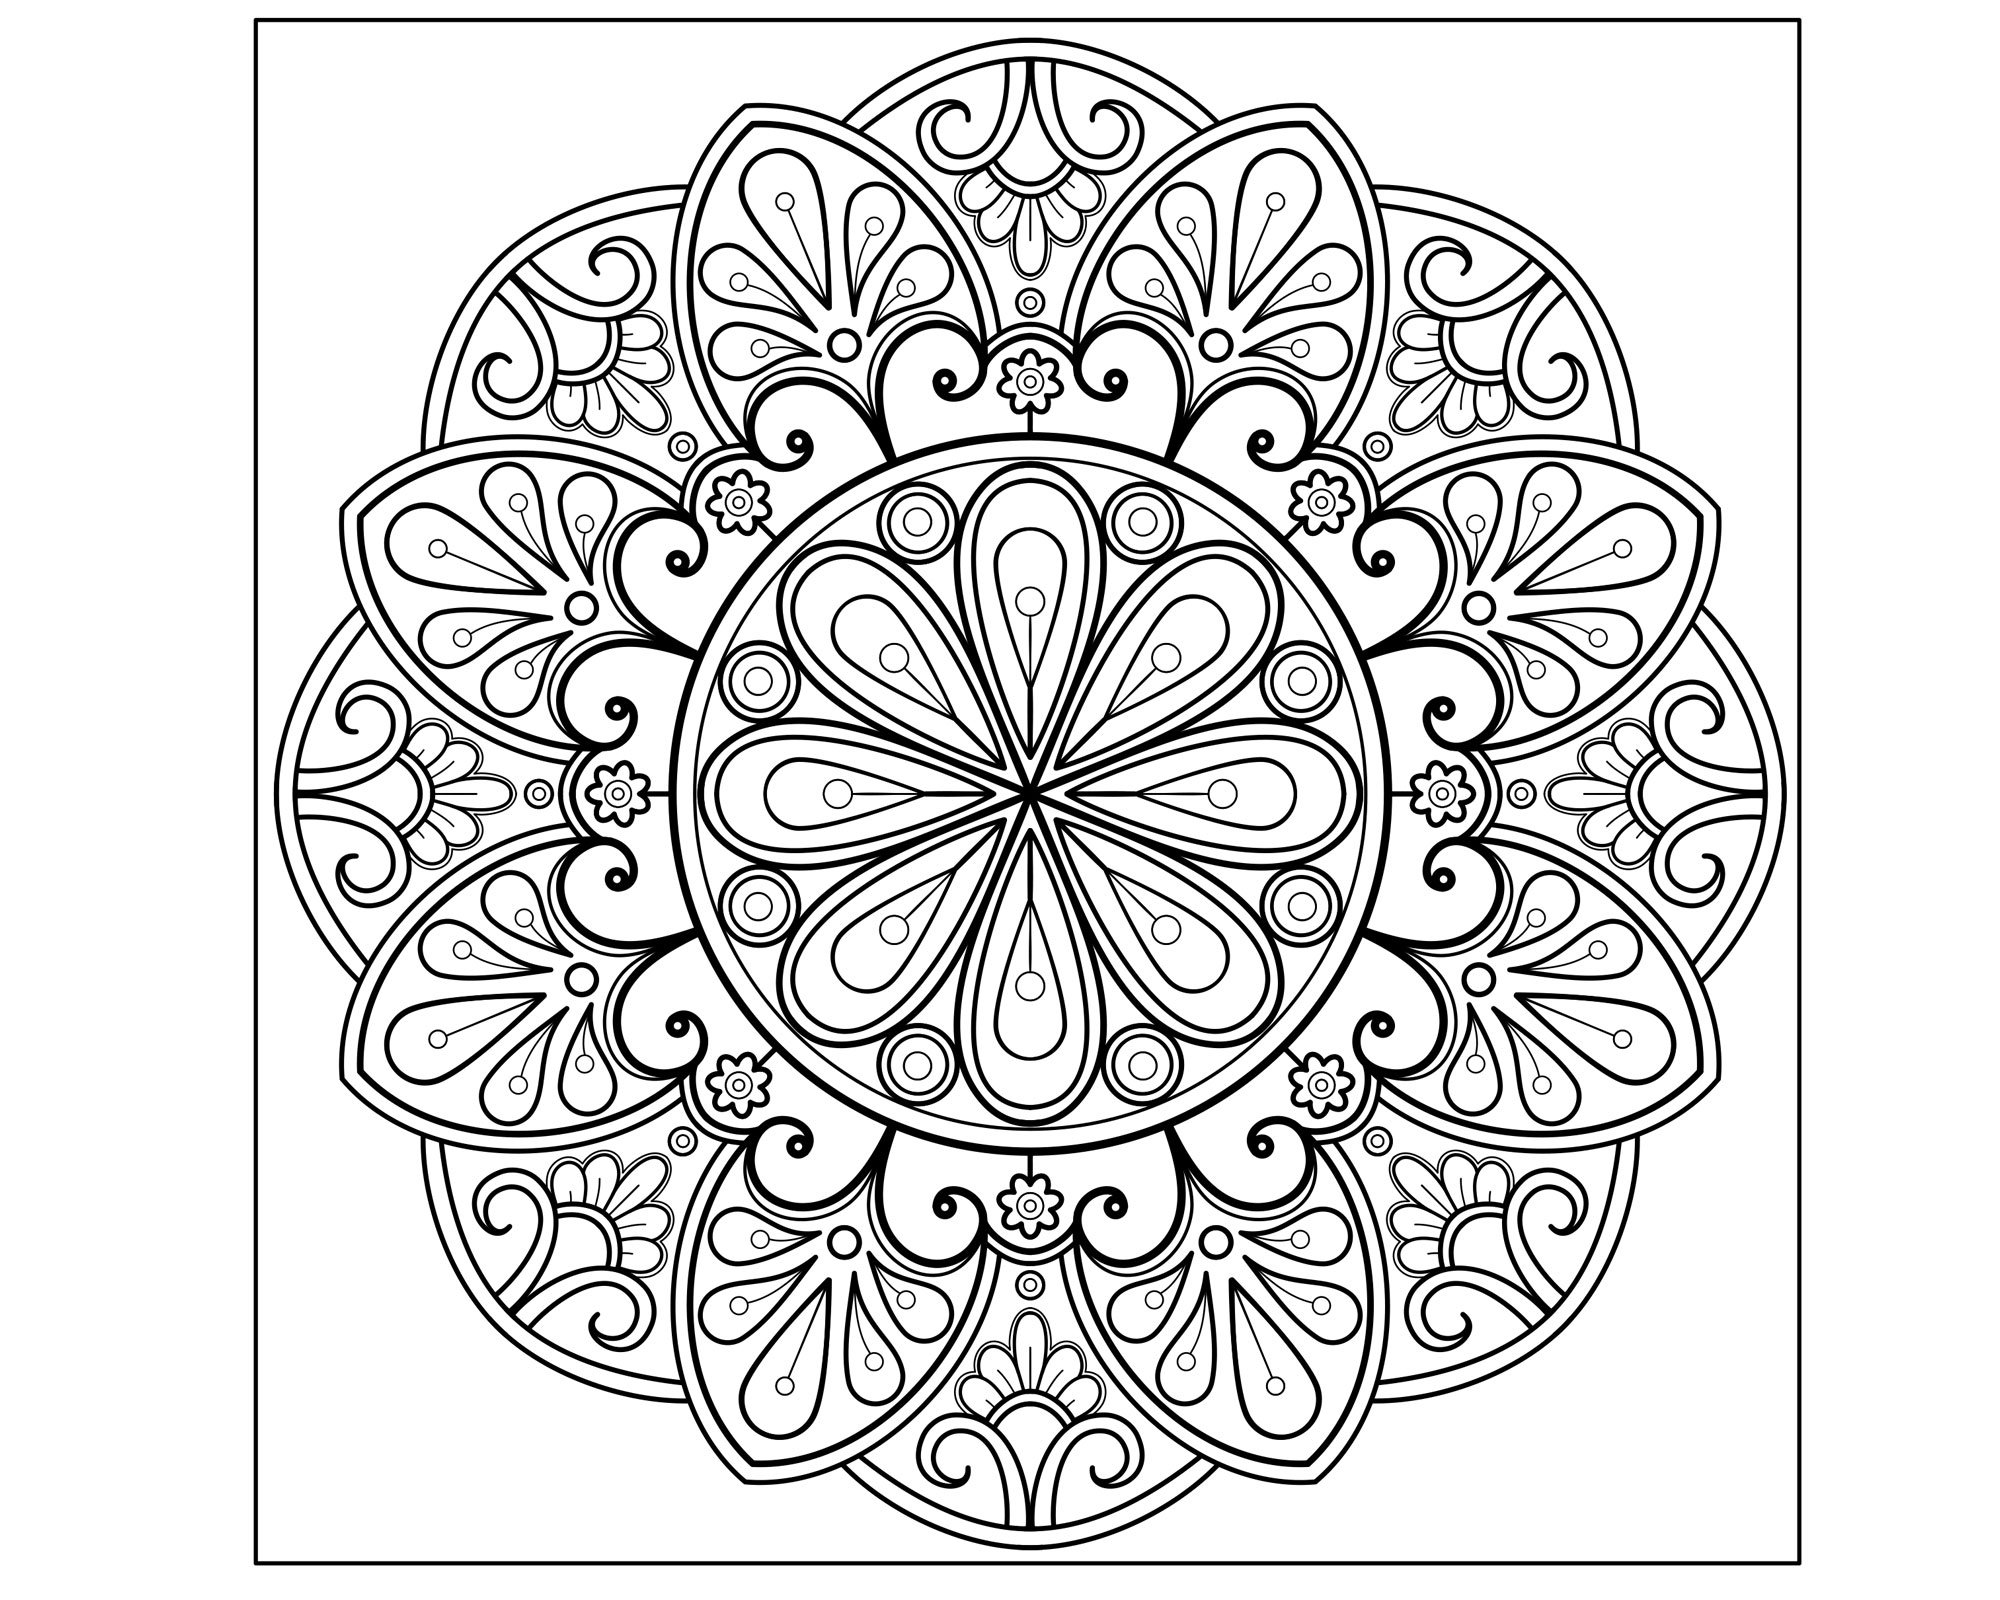 125 Pages Adult Coloring Book PDF Adult Mandala Coloring Book - Etsy